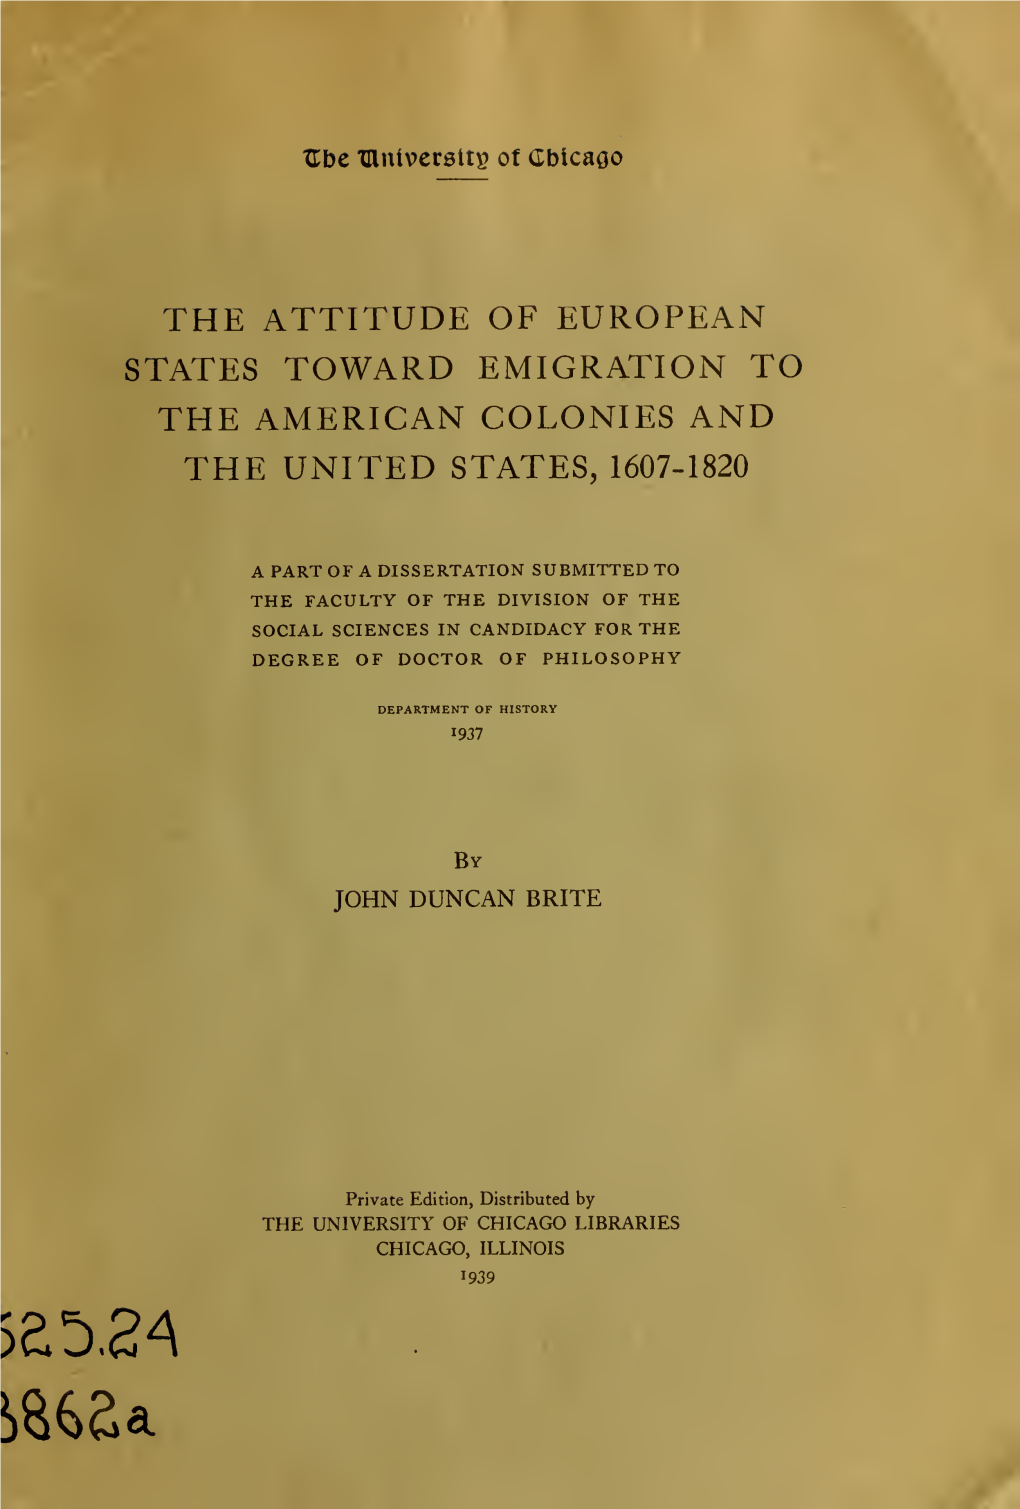 The Attitude of European States Toward Emigration to the American Colonies and the United States, 1607-1820